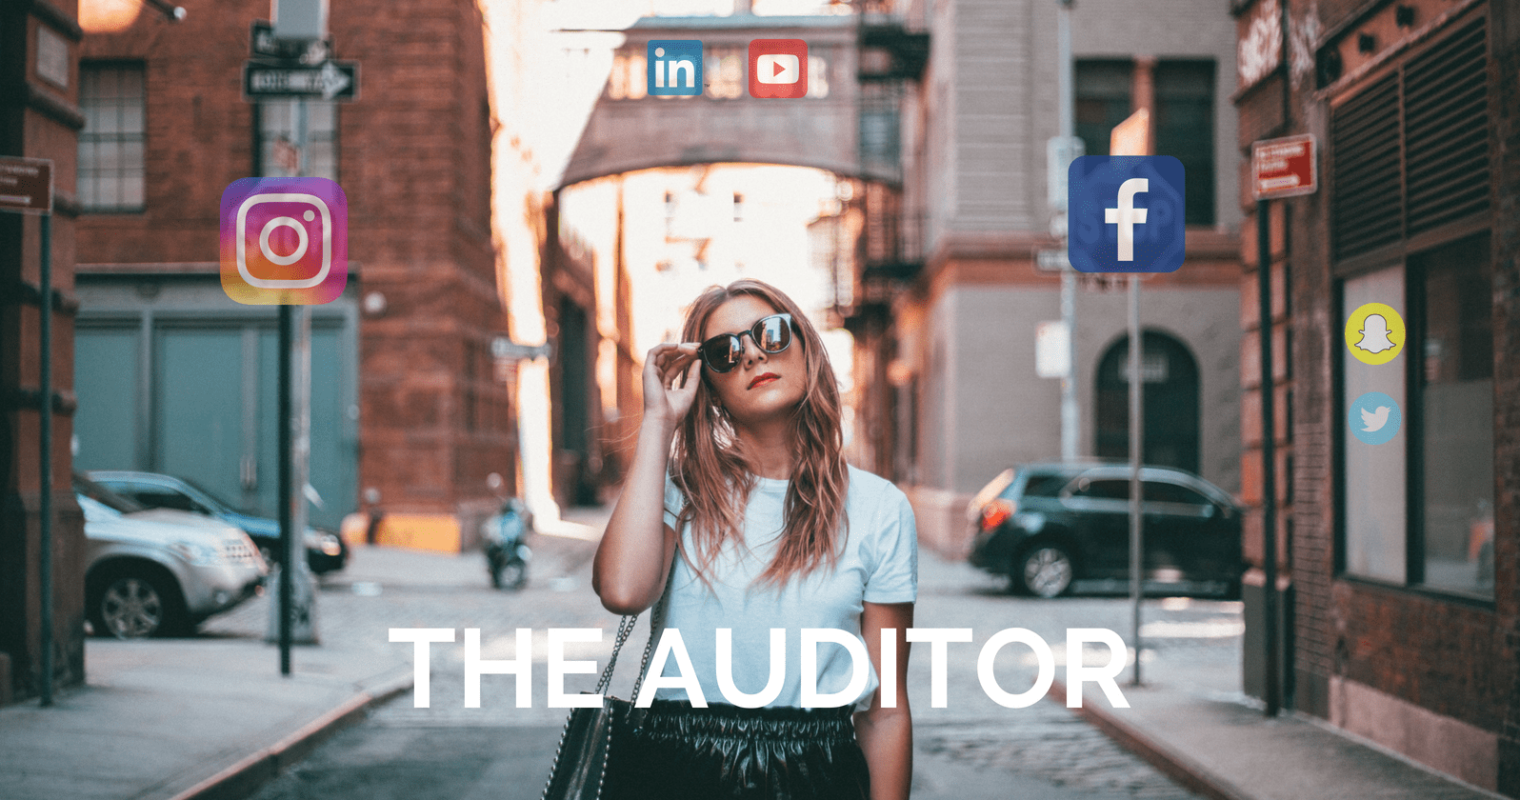 12 Steps for Conducting a Successful Social Media Audit